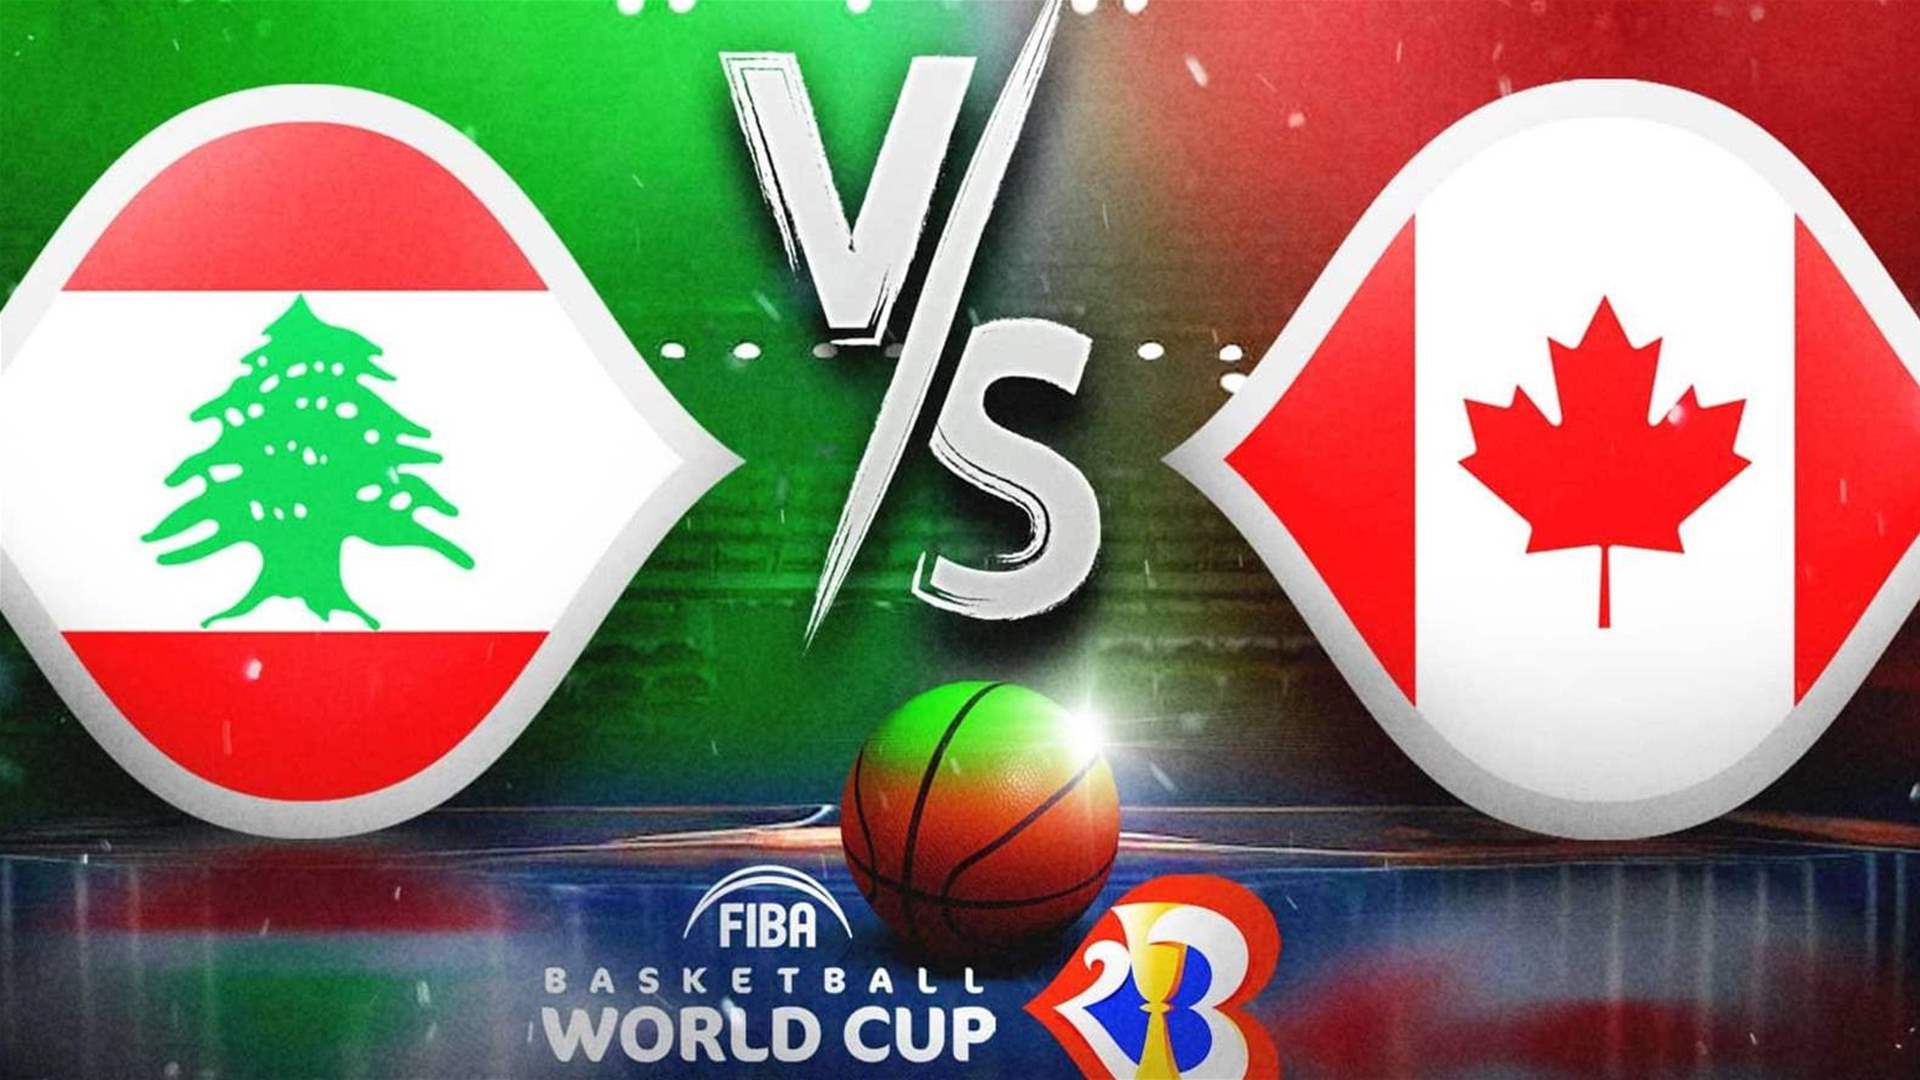 Tip-off Alert! Lebanon vs Canada in the FIBA Basketball World Cup. Tune in on LBCGroup.tv or LB2!